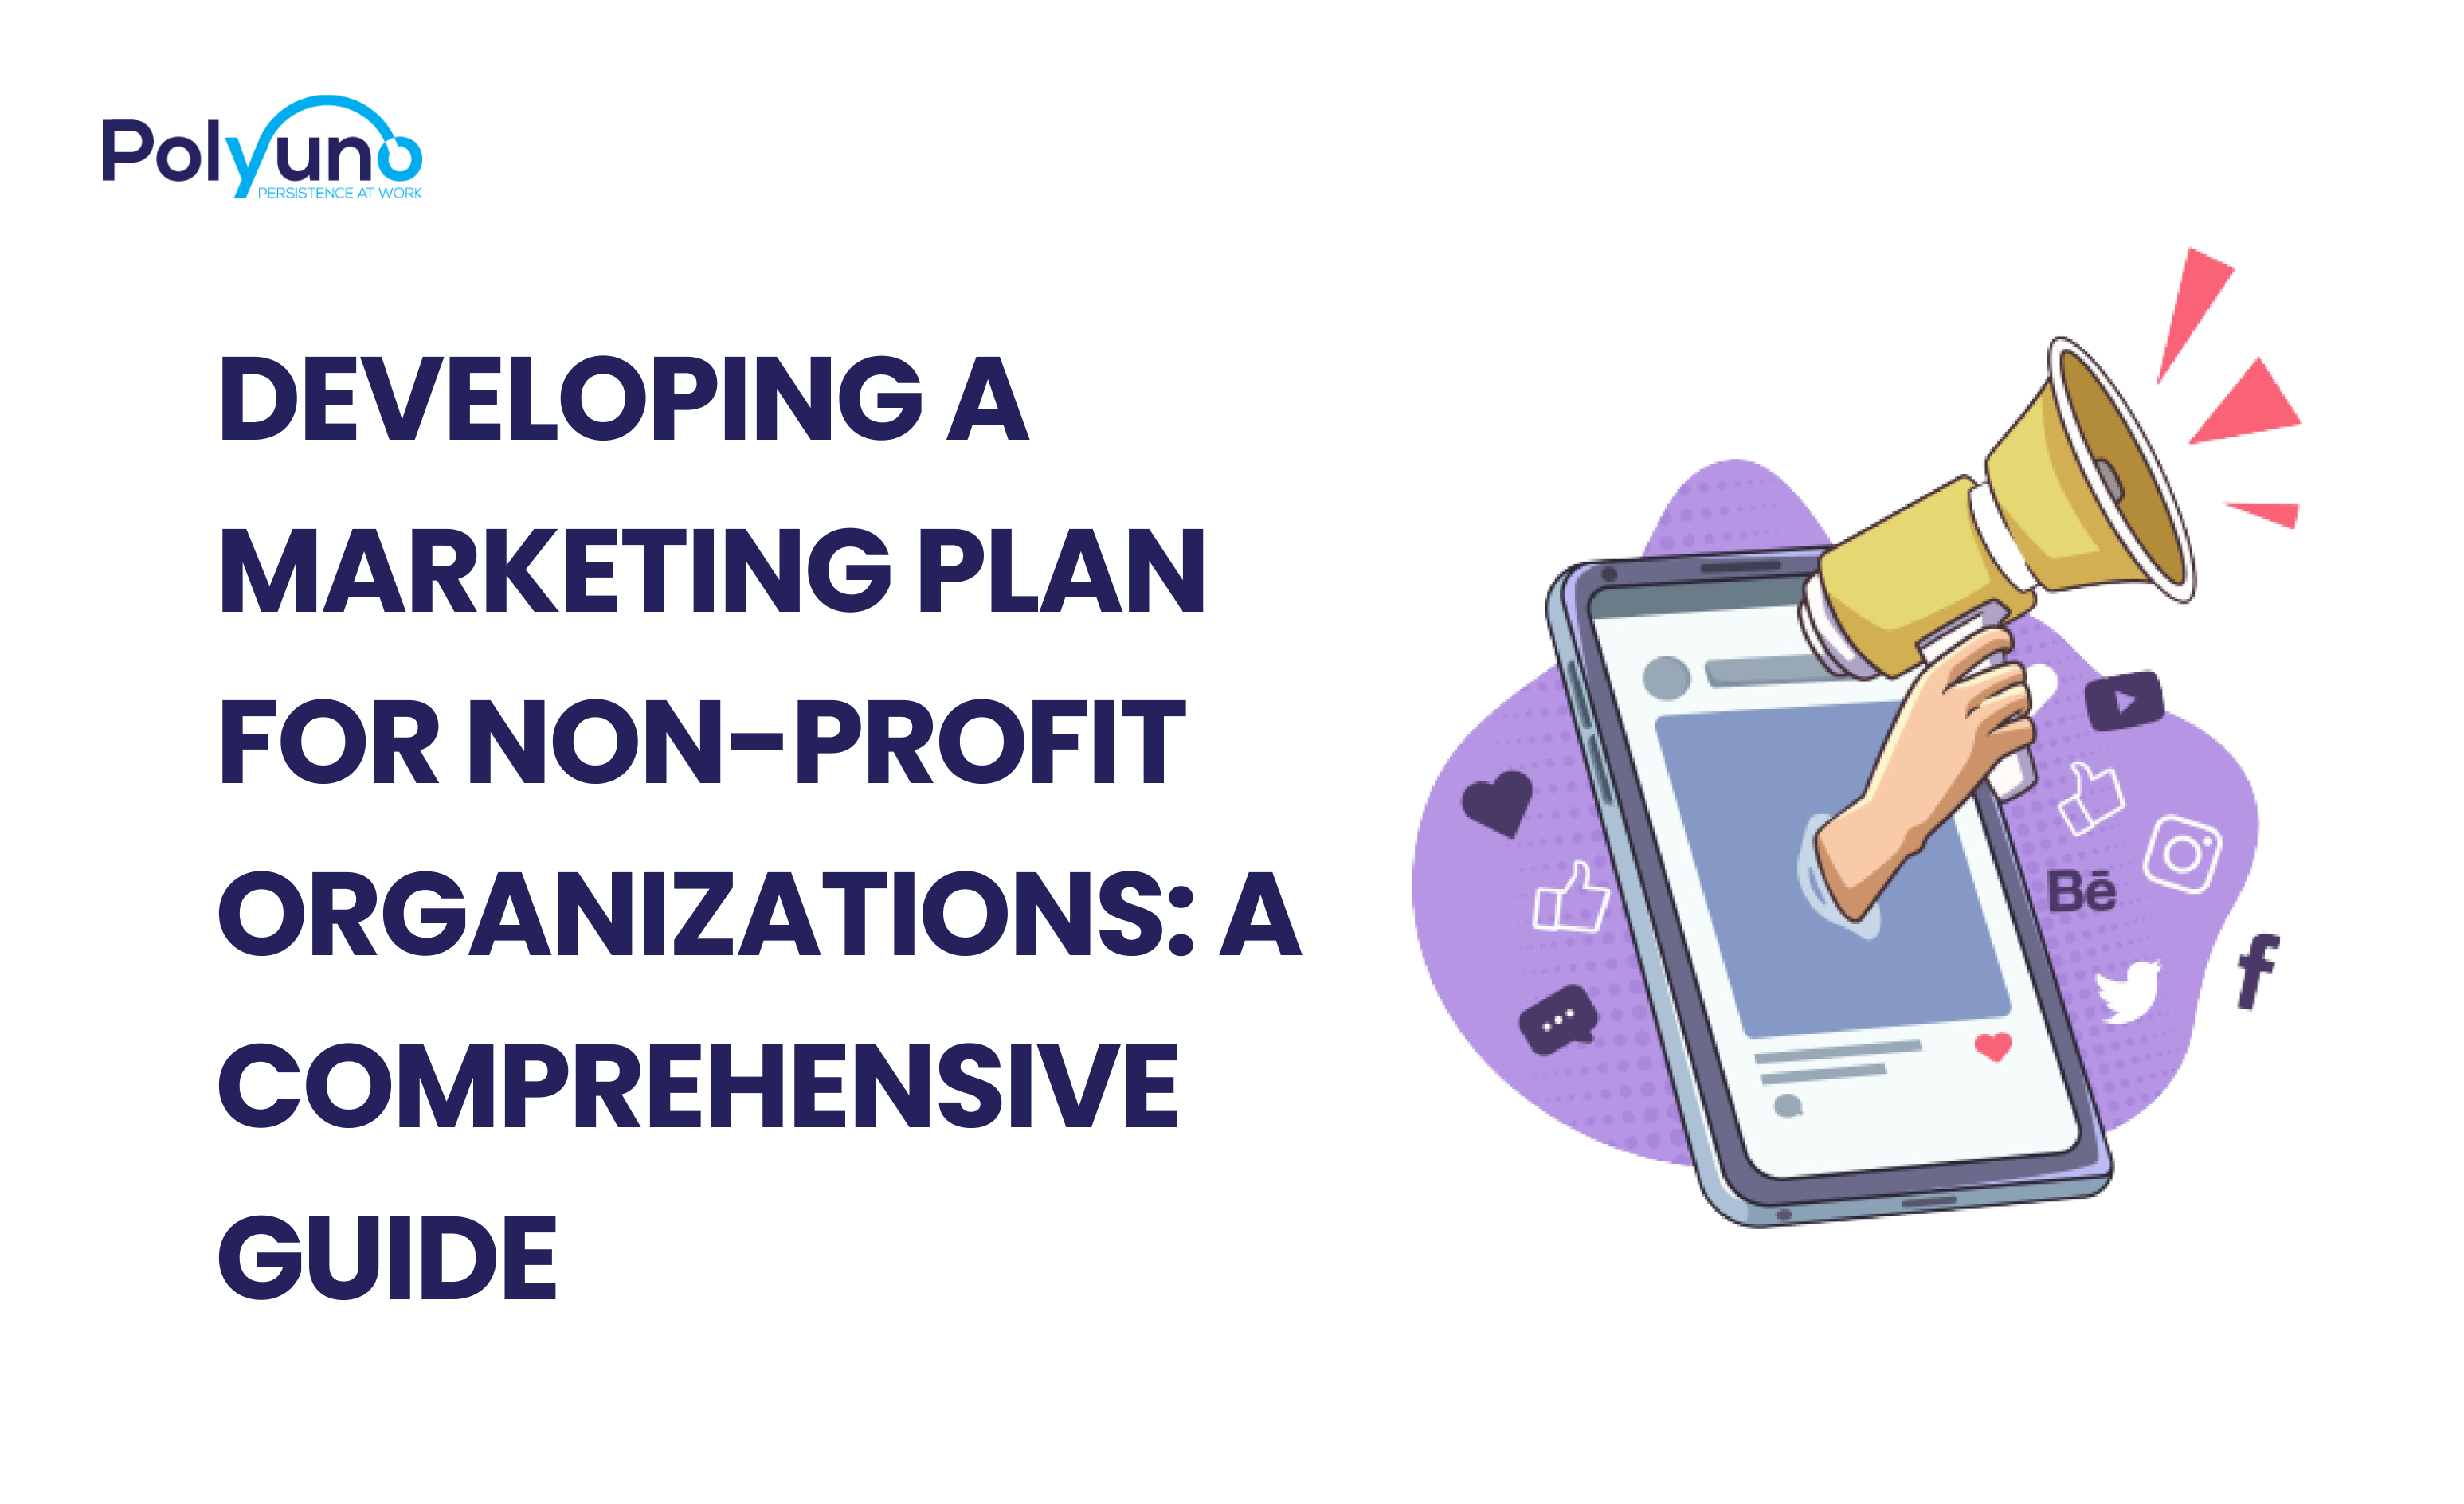 Developing a Marketing Plan for Nonprofit Organizations